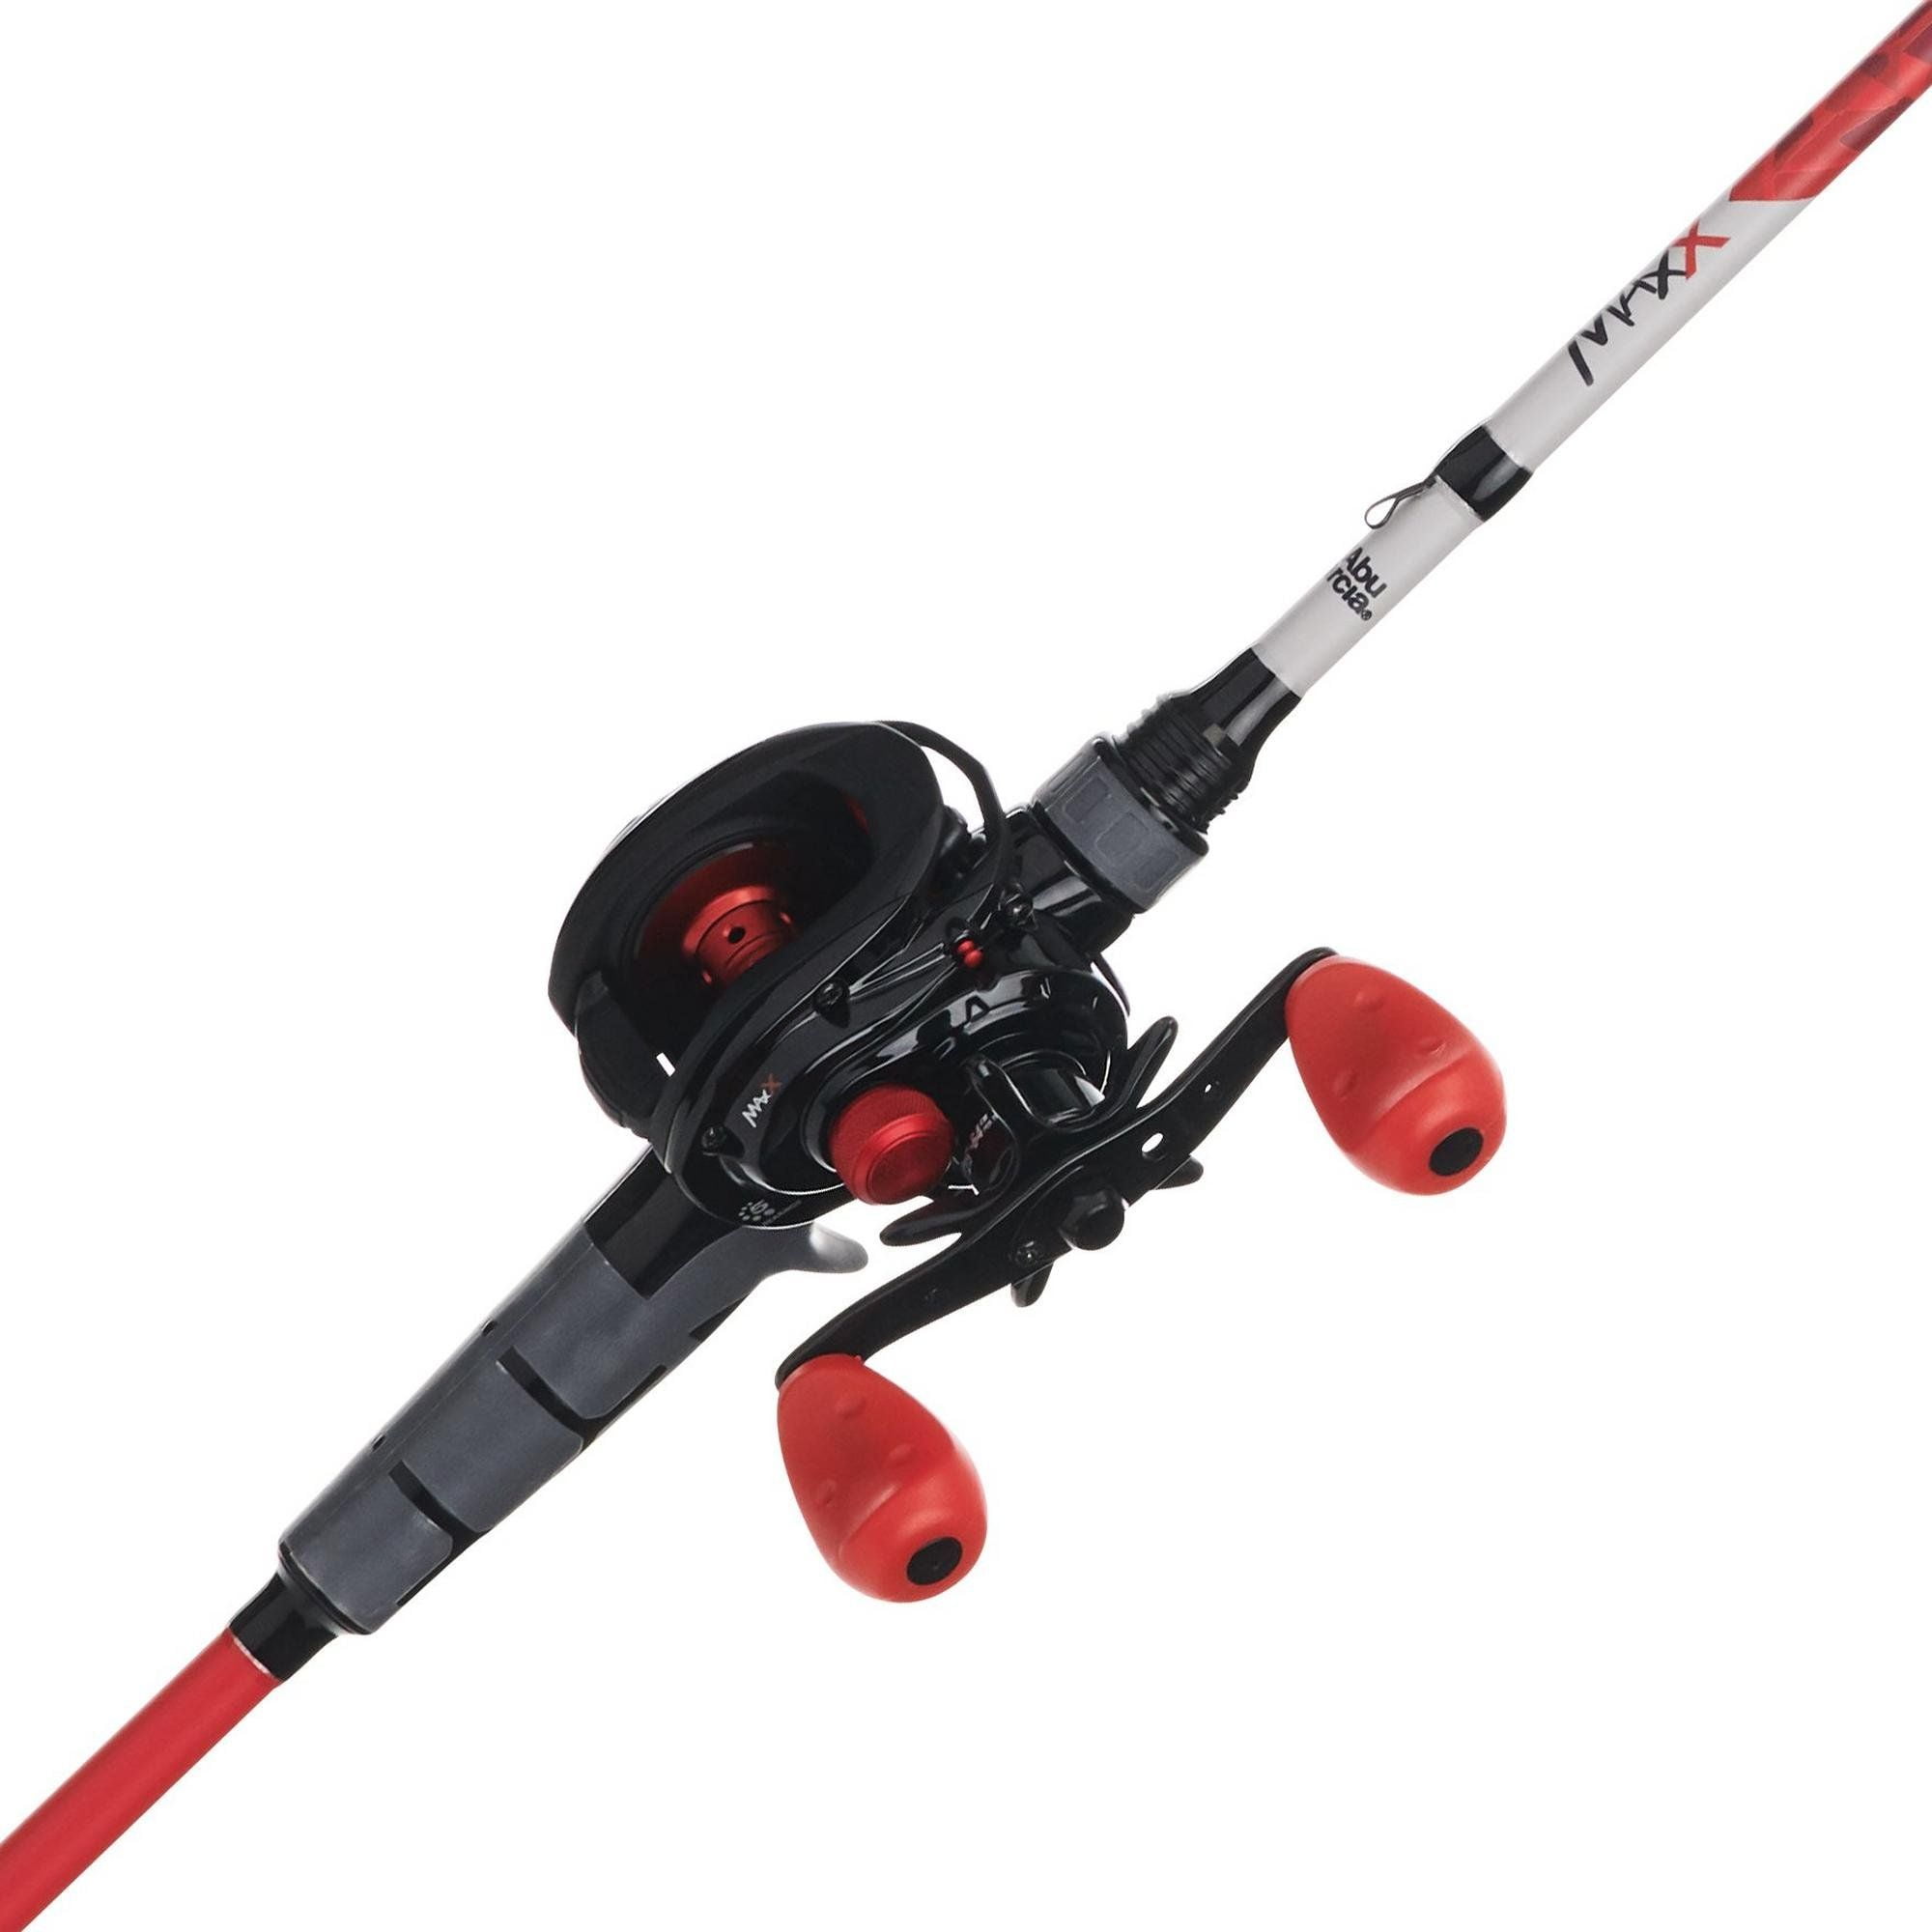  Abu Garcia 6' Max X Fishing Rod and Reel Spinning Combo, 3 +1  Ball Bearings with Lightweight Graphite Body & Rotor, Rocket Line  Management System Red : Sports & Outdoors